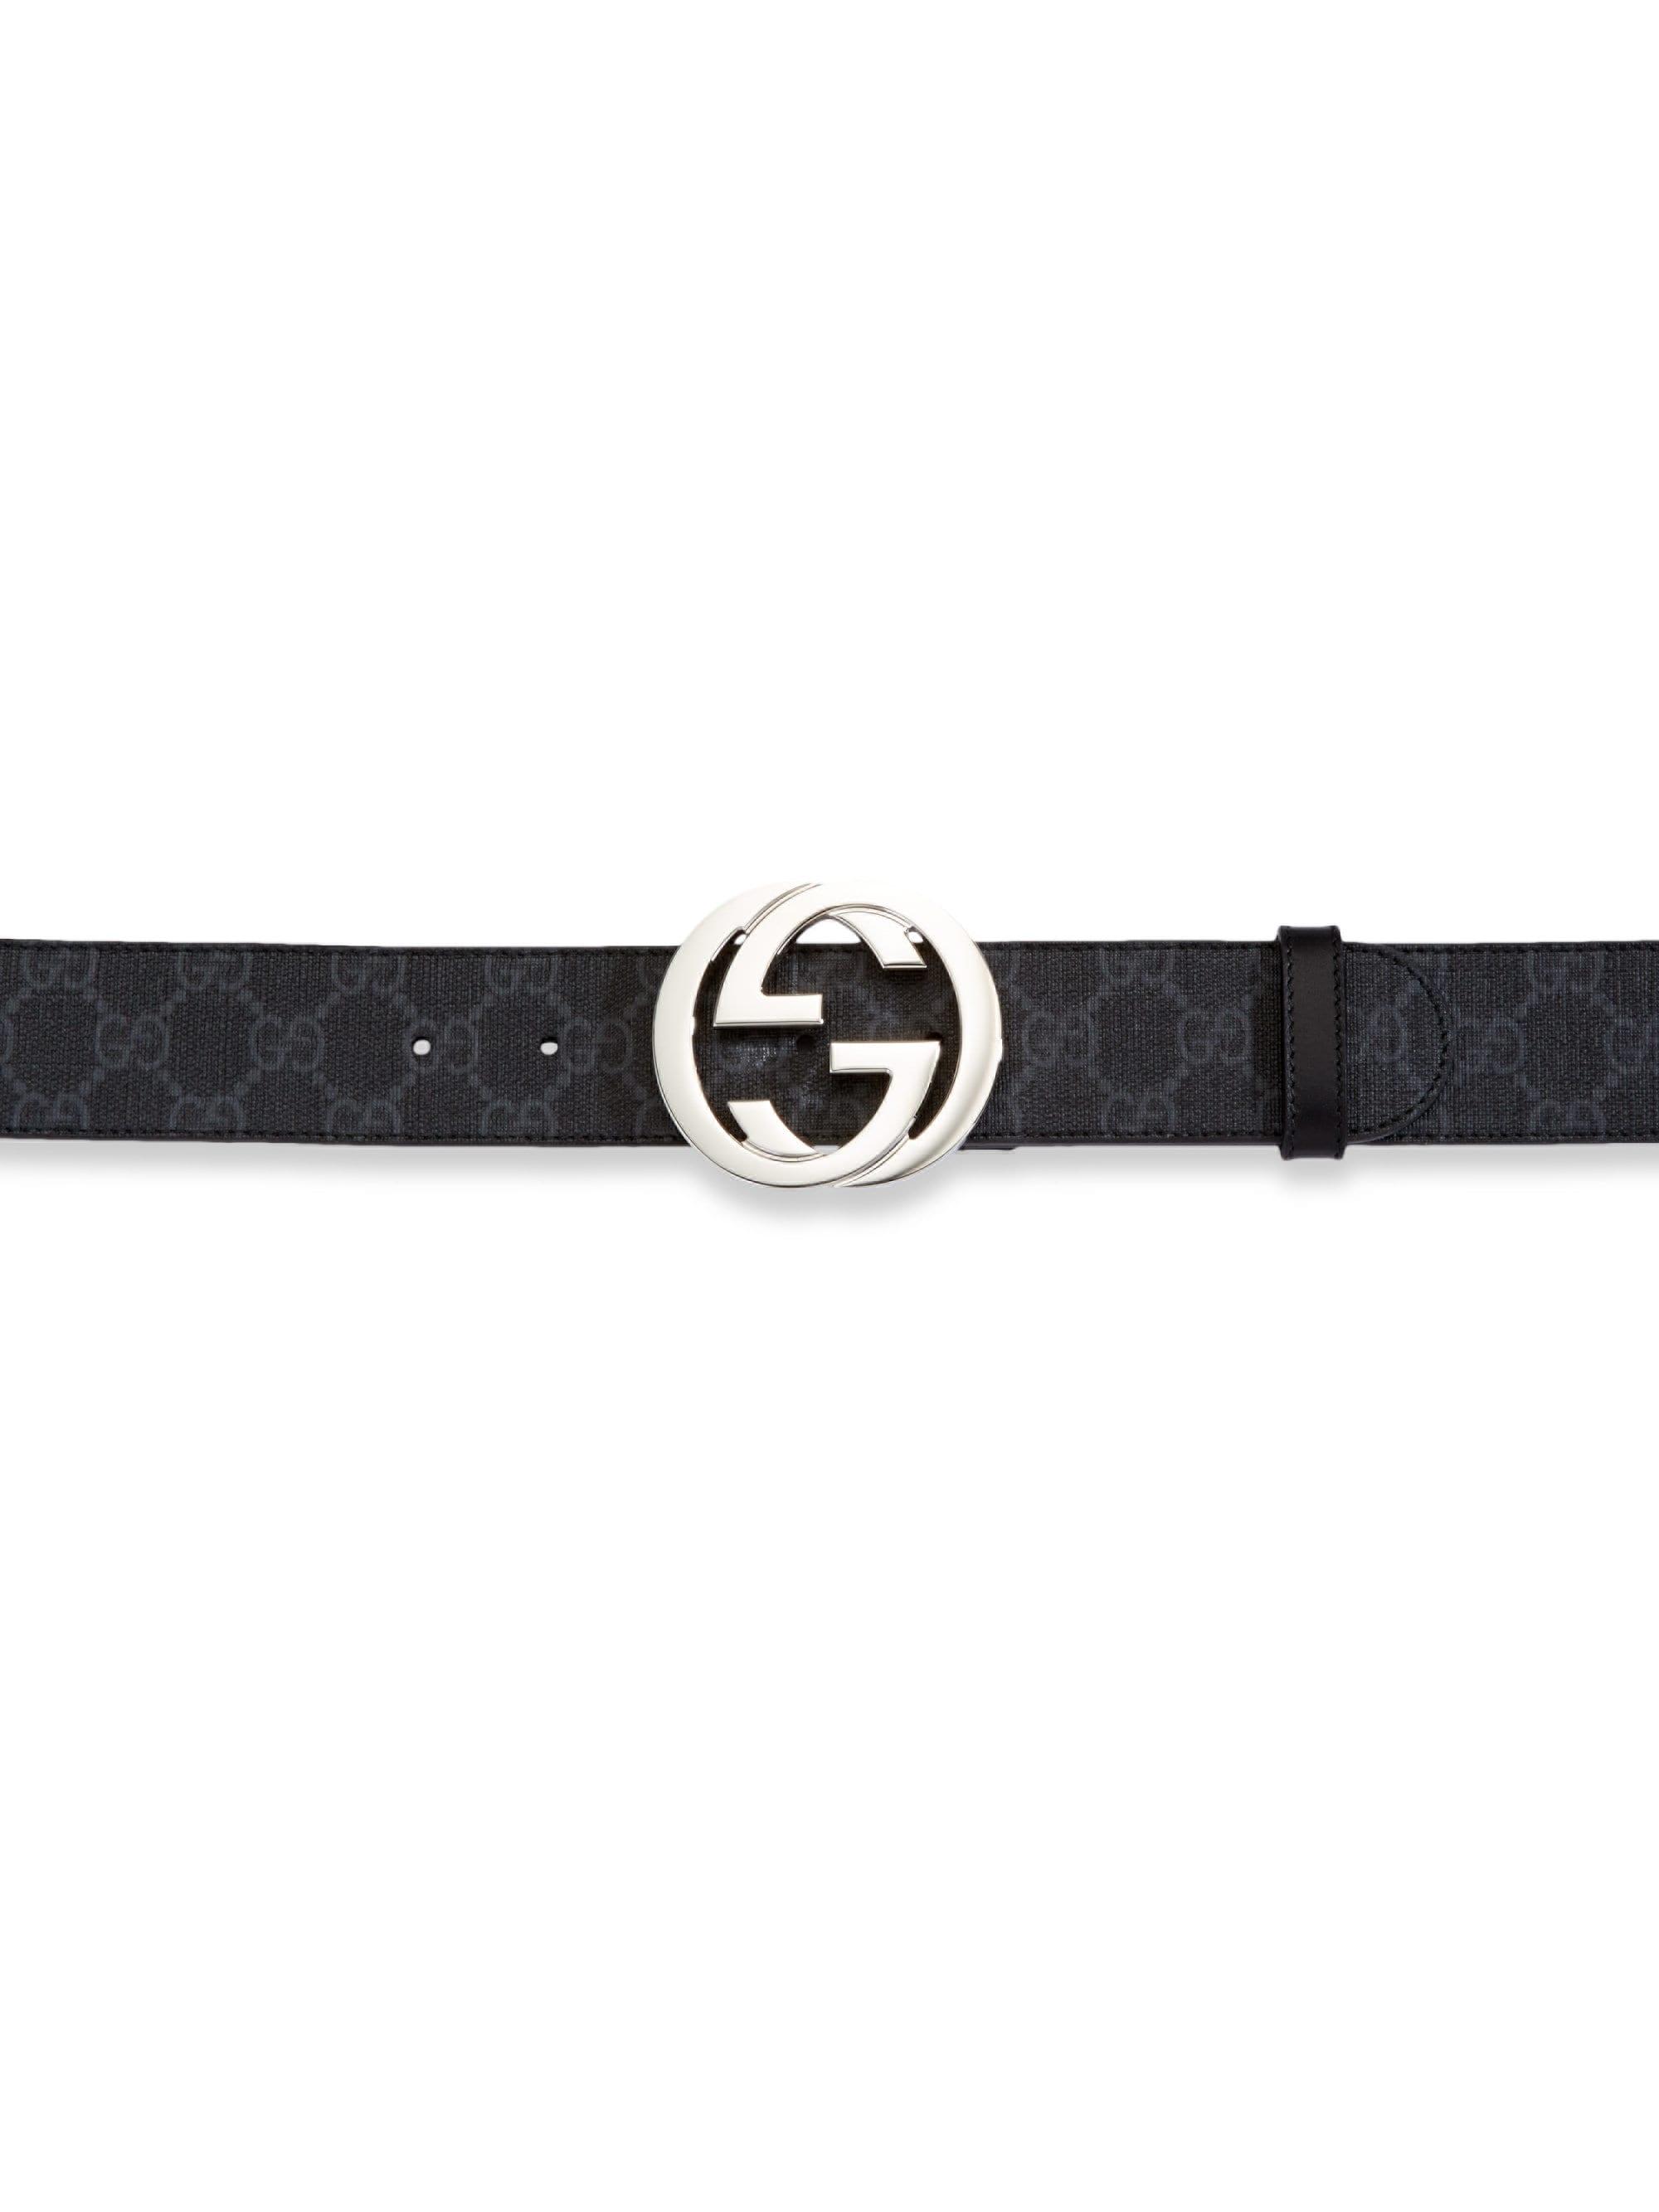 Gucci GG Supreme Belt With G Buckle in Black for Men - Save 16% - Lyst